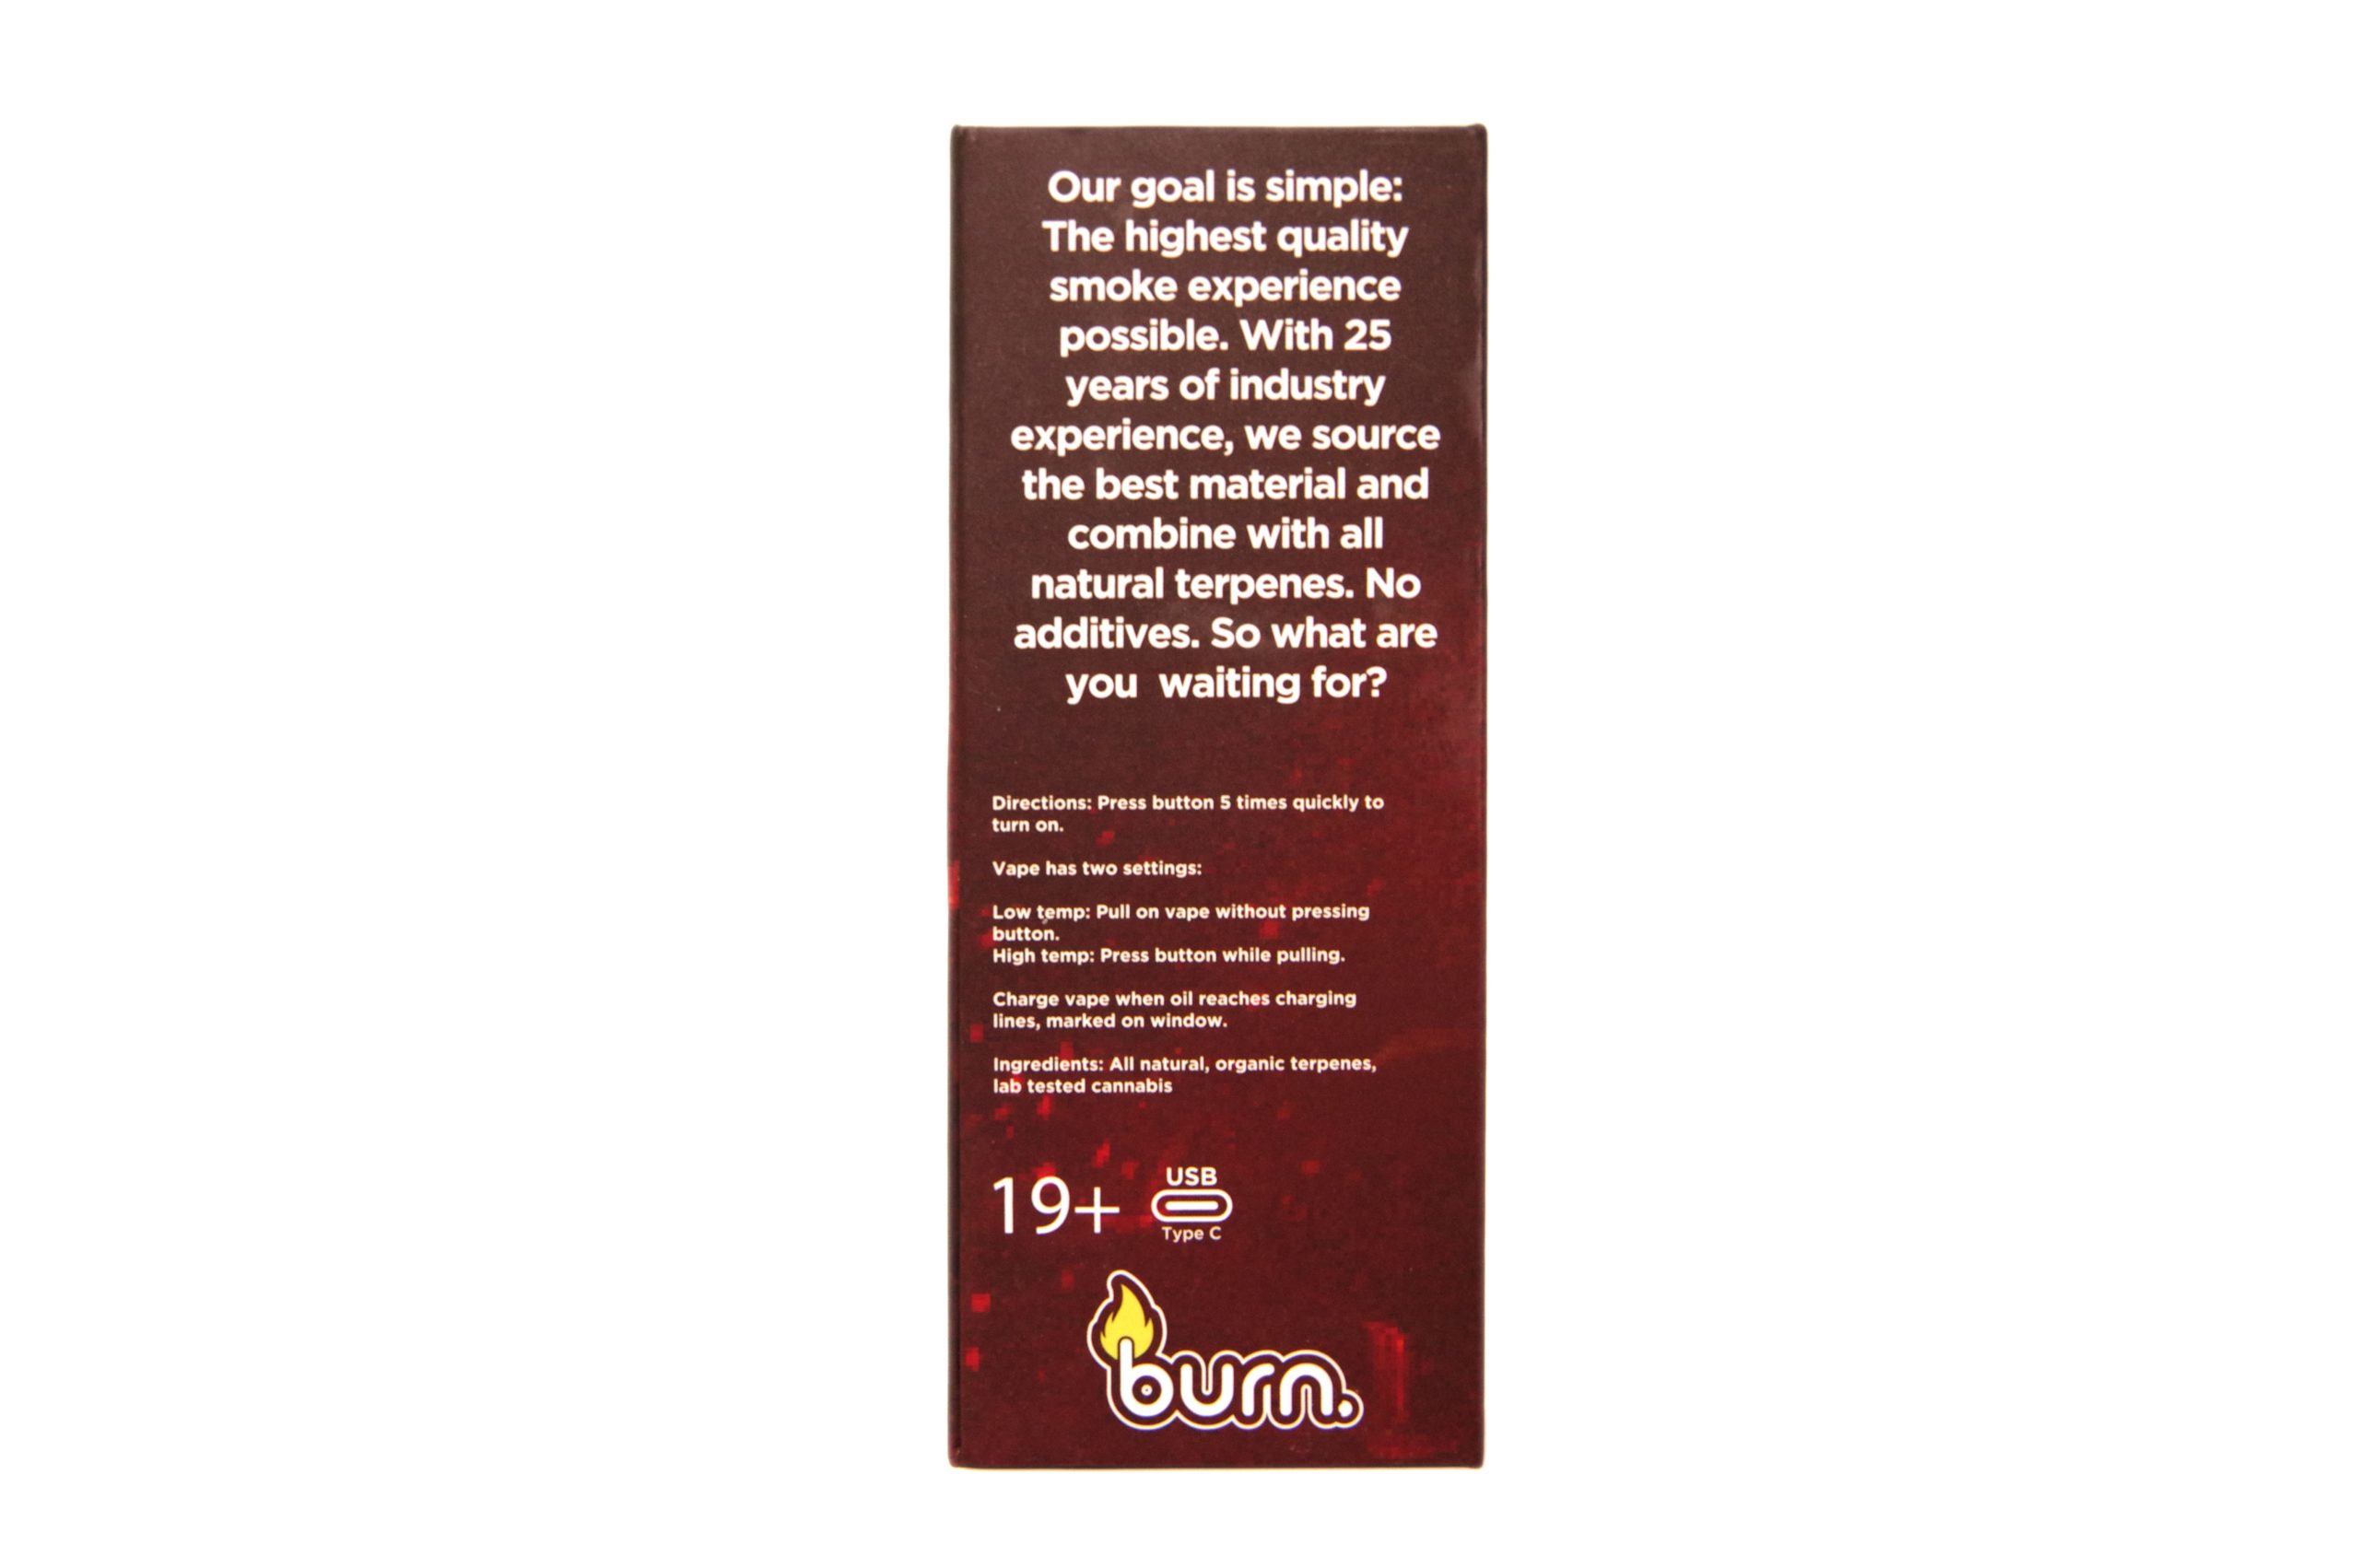 Buy Burn Extracts – Gas Mask 3ml Mega Sized Disposable Pen online Canada